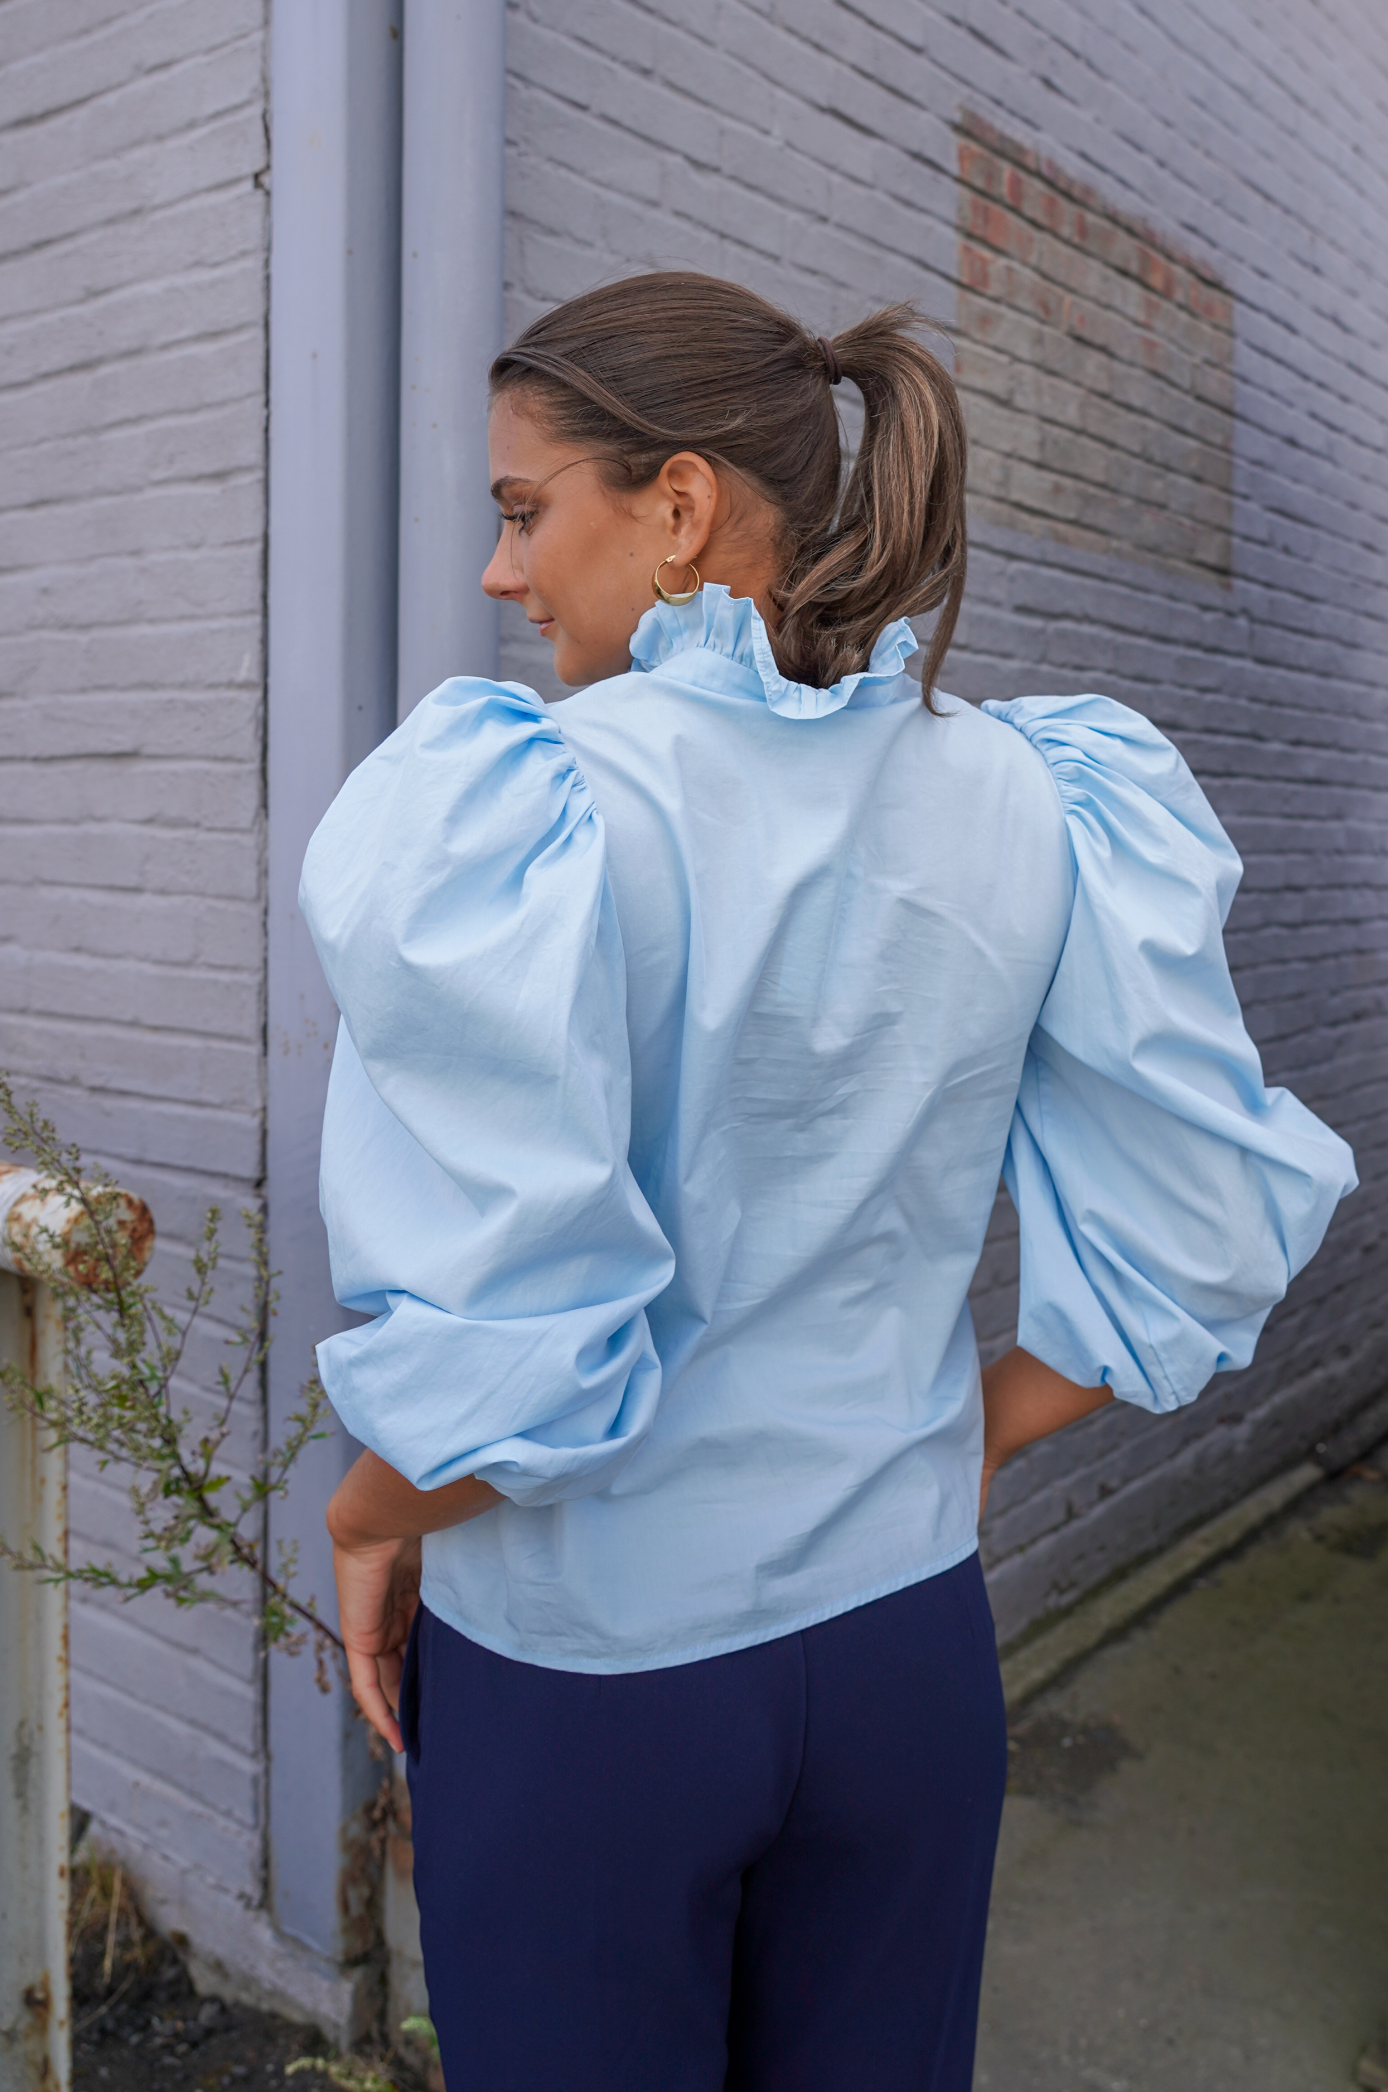 How to wear ruffles - Styled By Sally